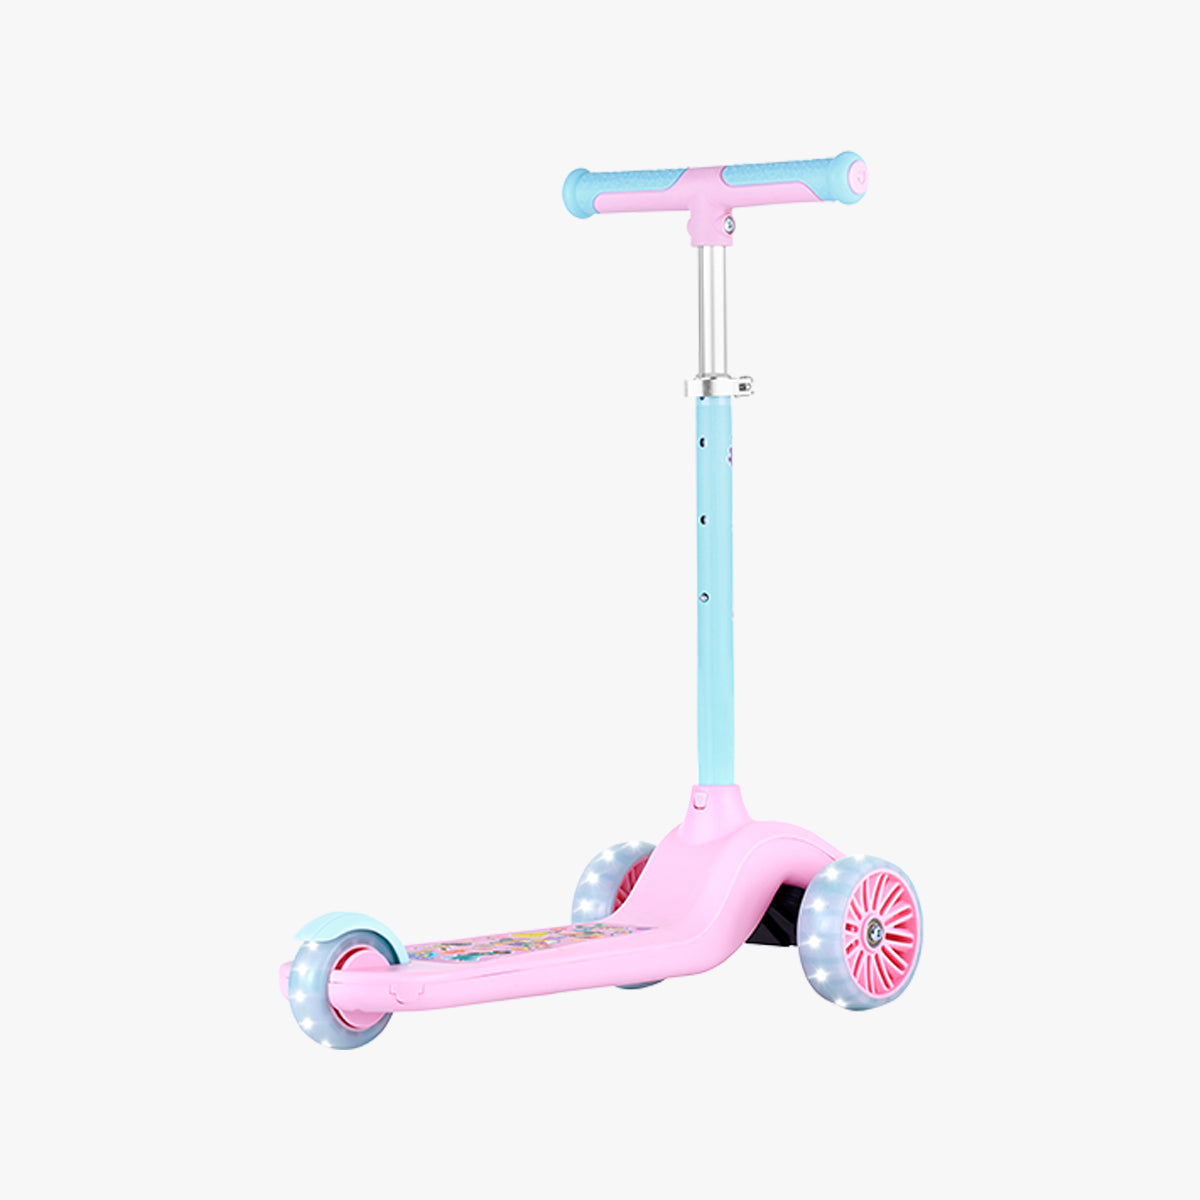 back view of the the Disney Princess customizable kick scooter